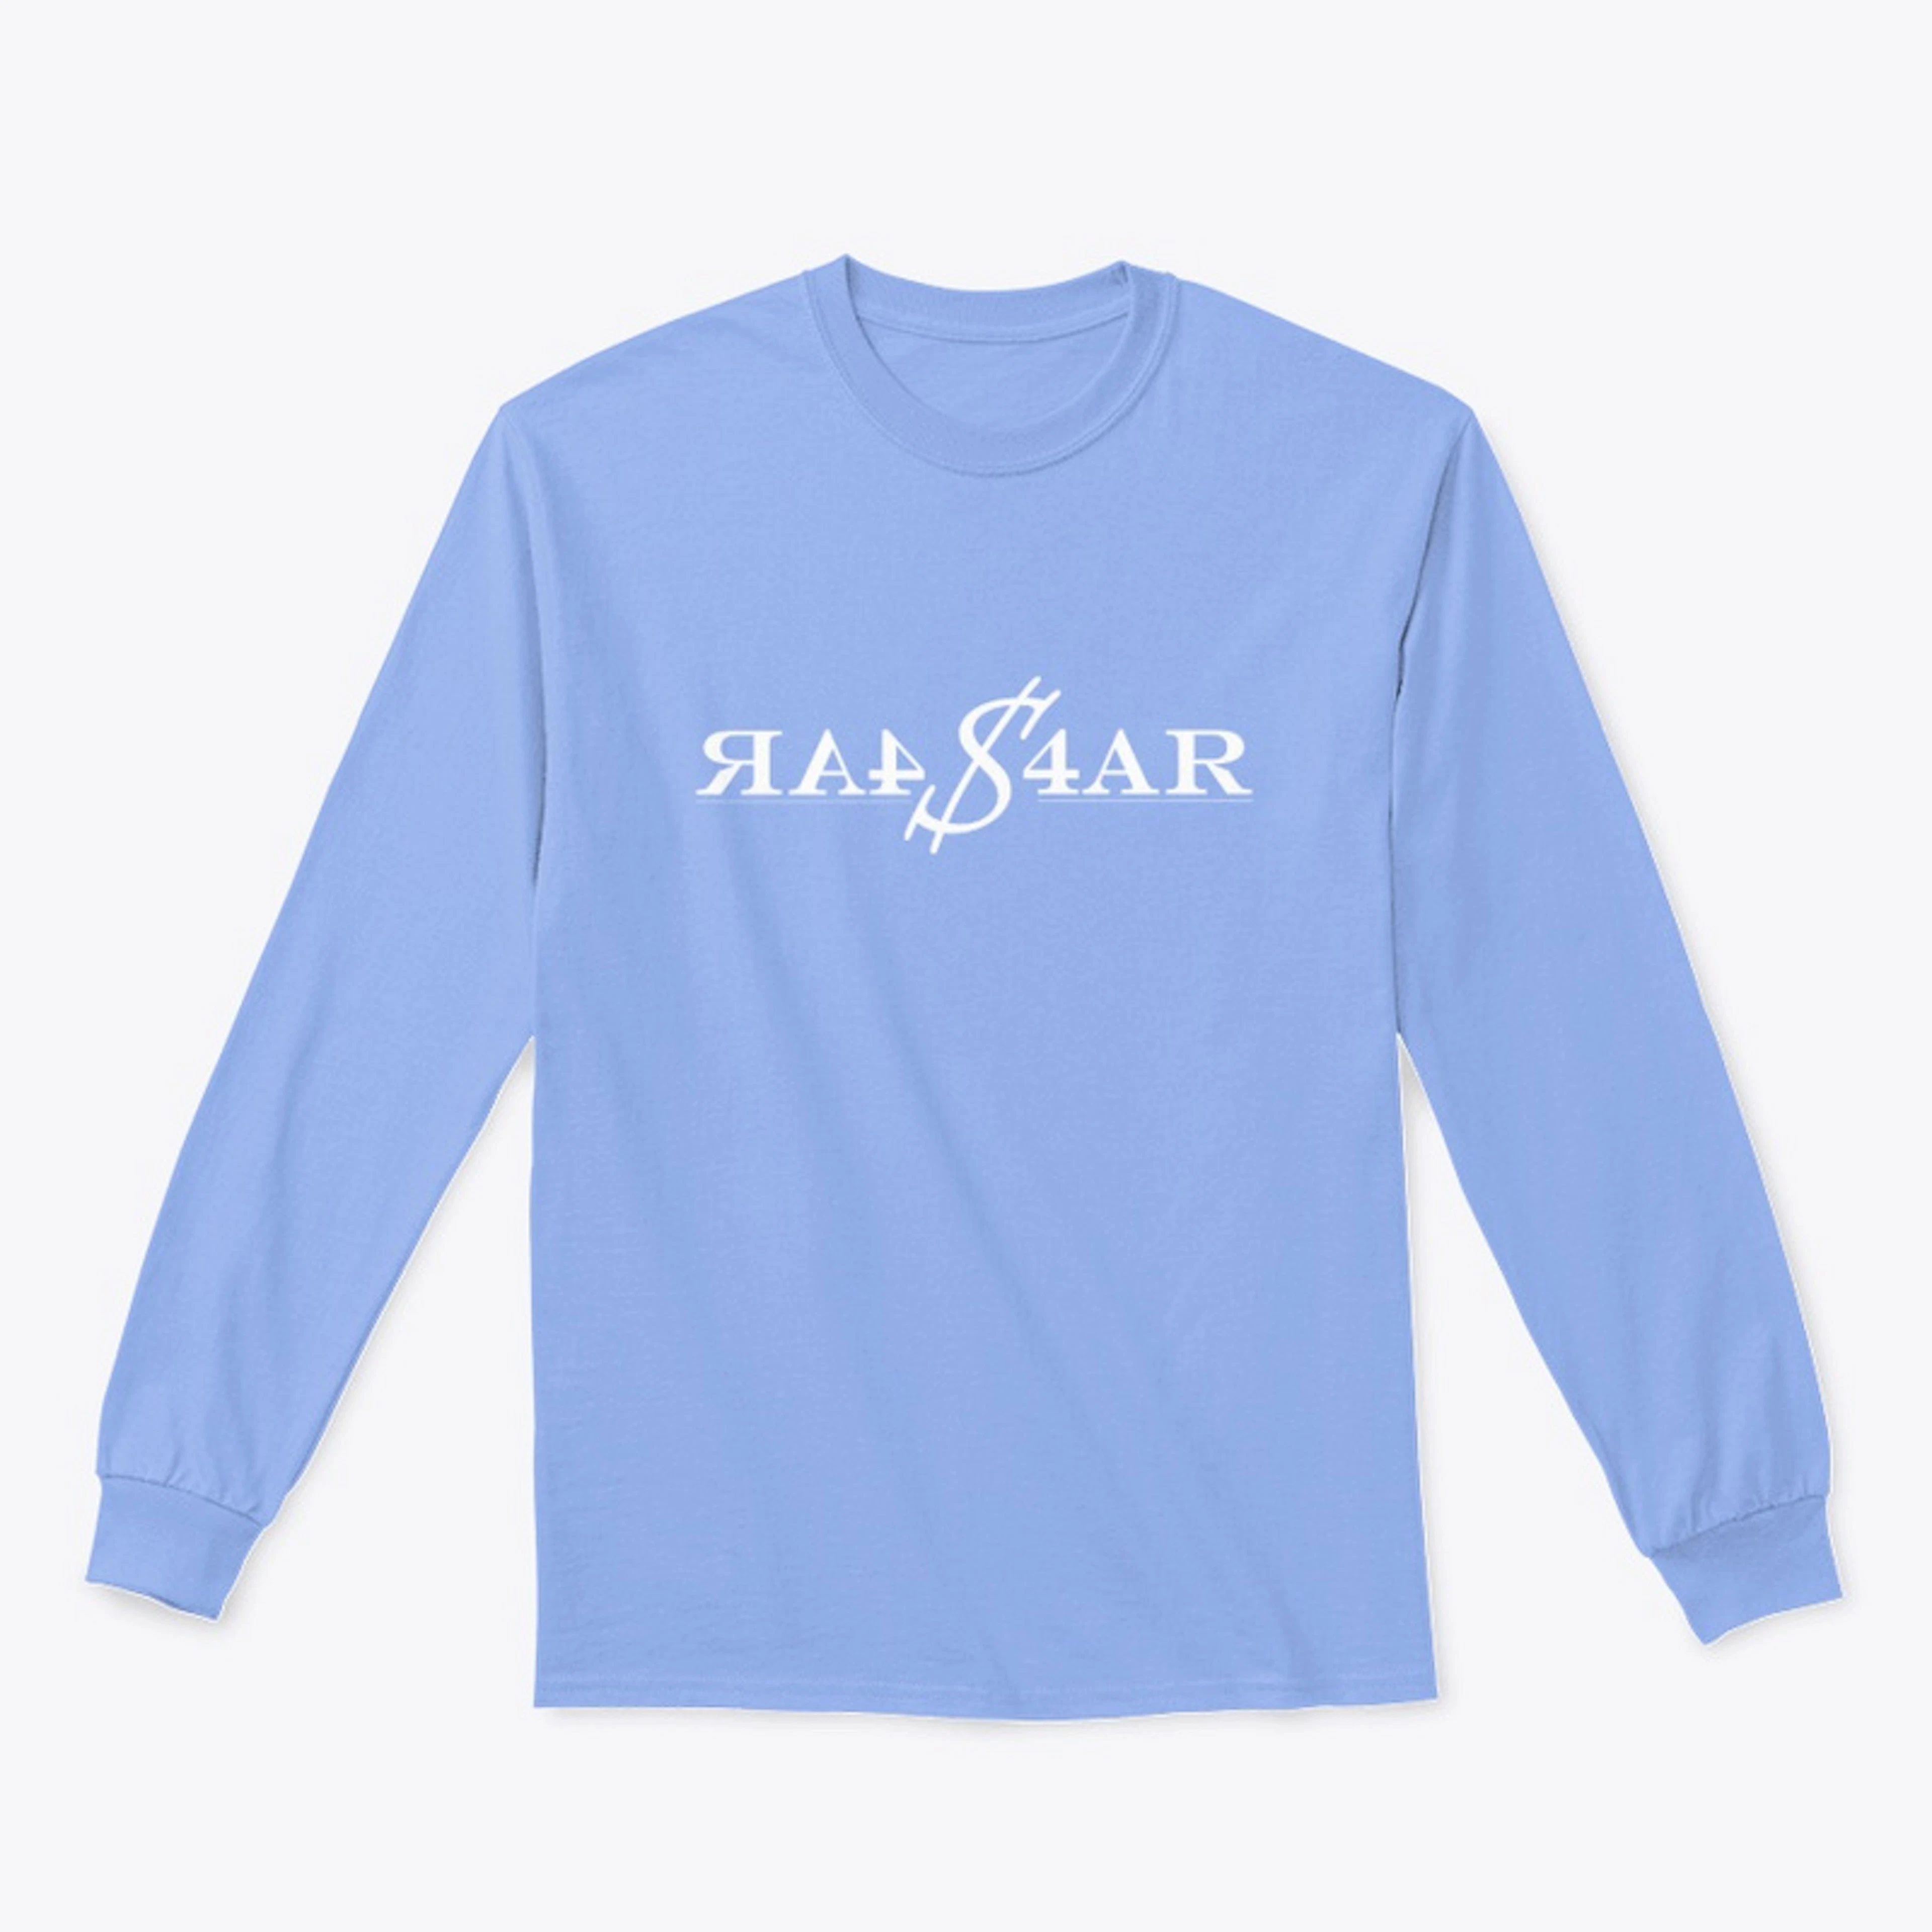 WHT "$4AR" Colors Available Long Sleeves